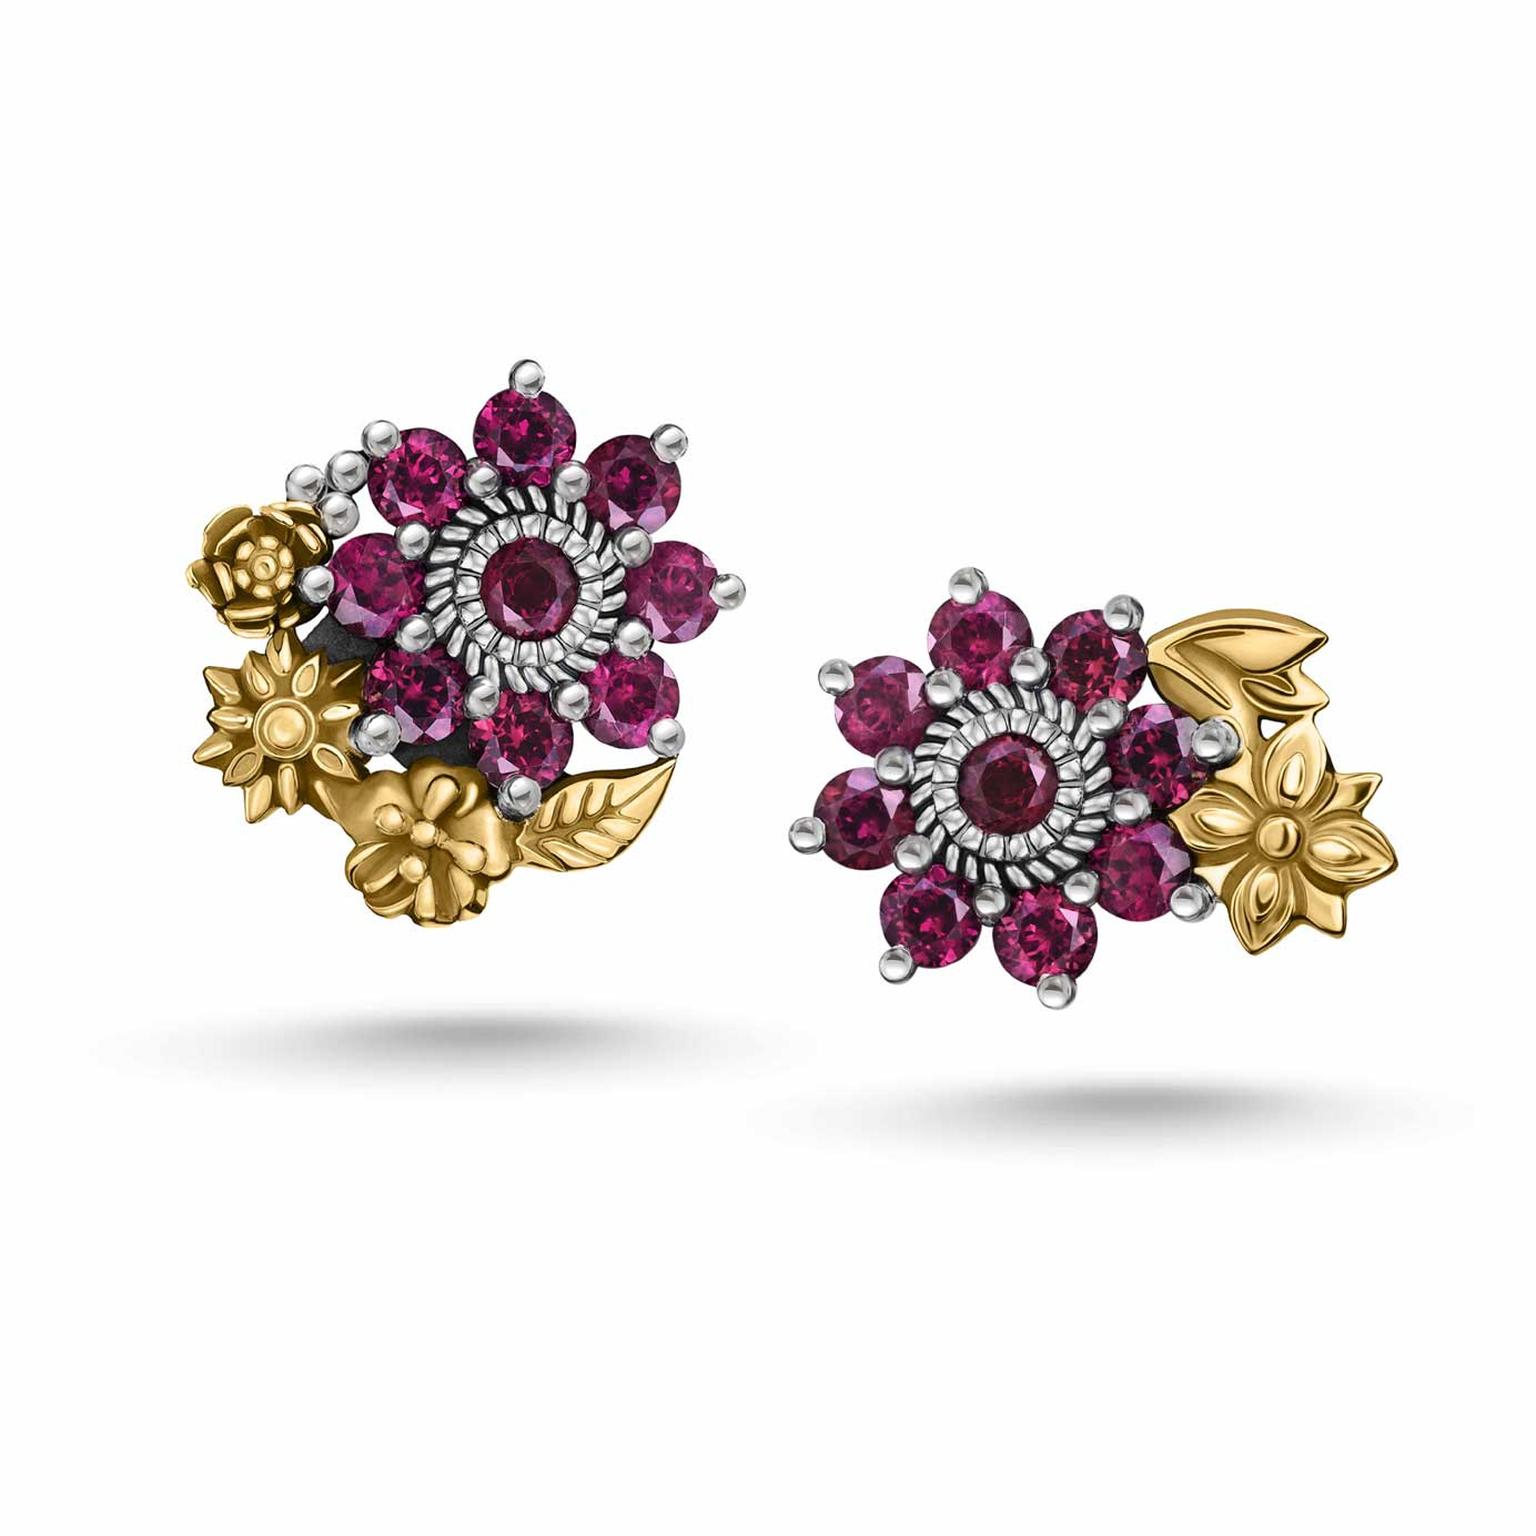 Azza Fahmy Jewellery Mismatched Floral earrings